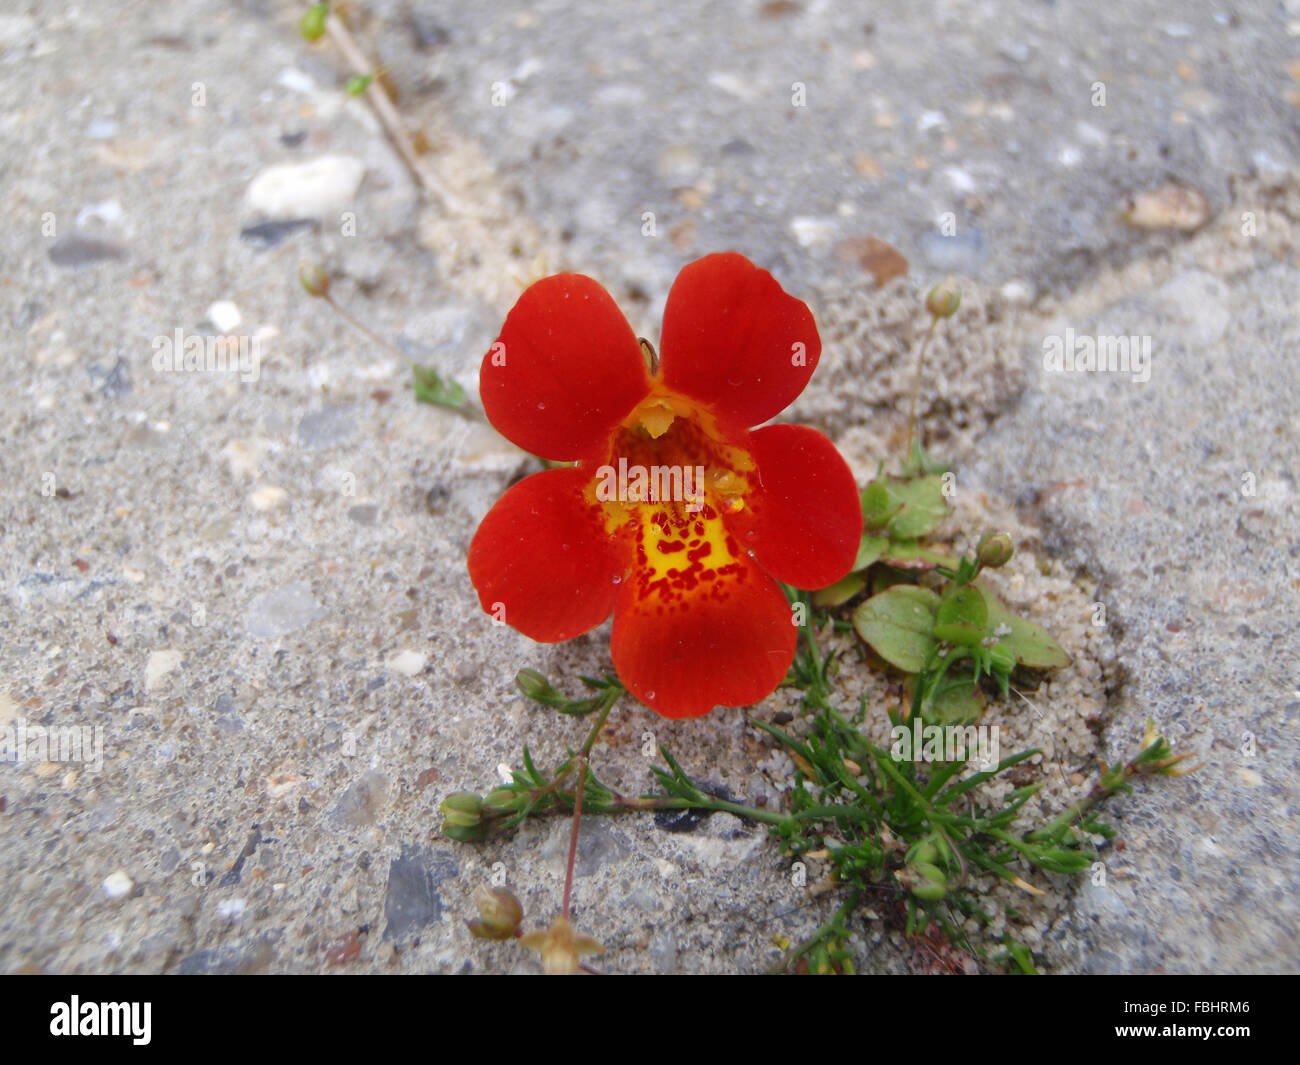 Water droplets on red and yellow mimulus flower on stone driveway Stock Photo